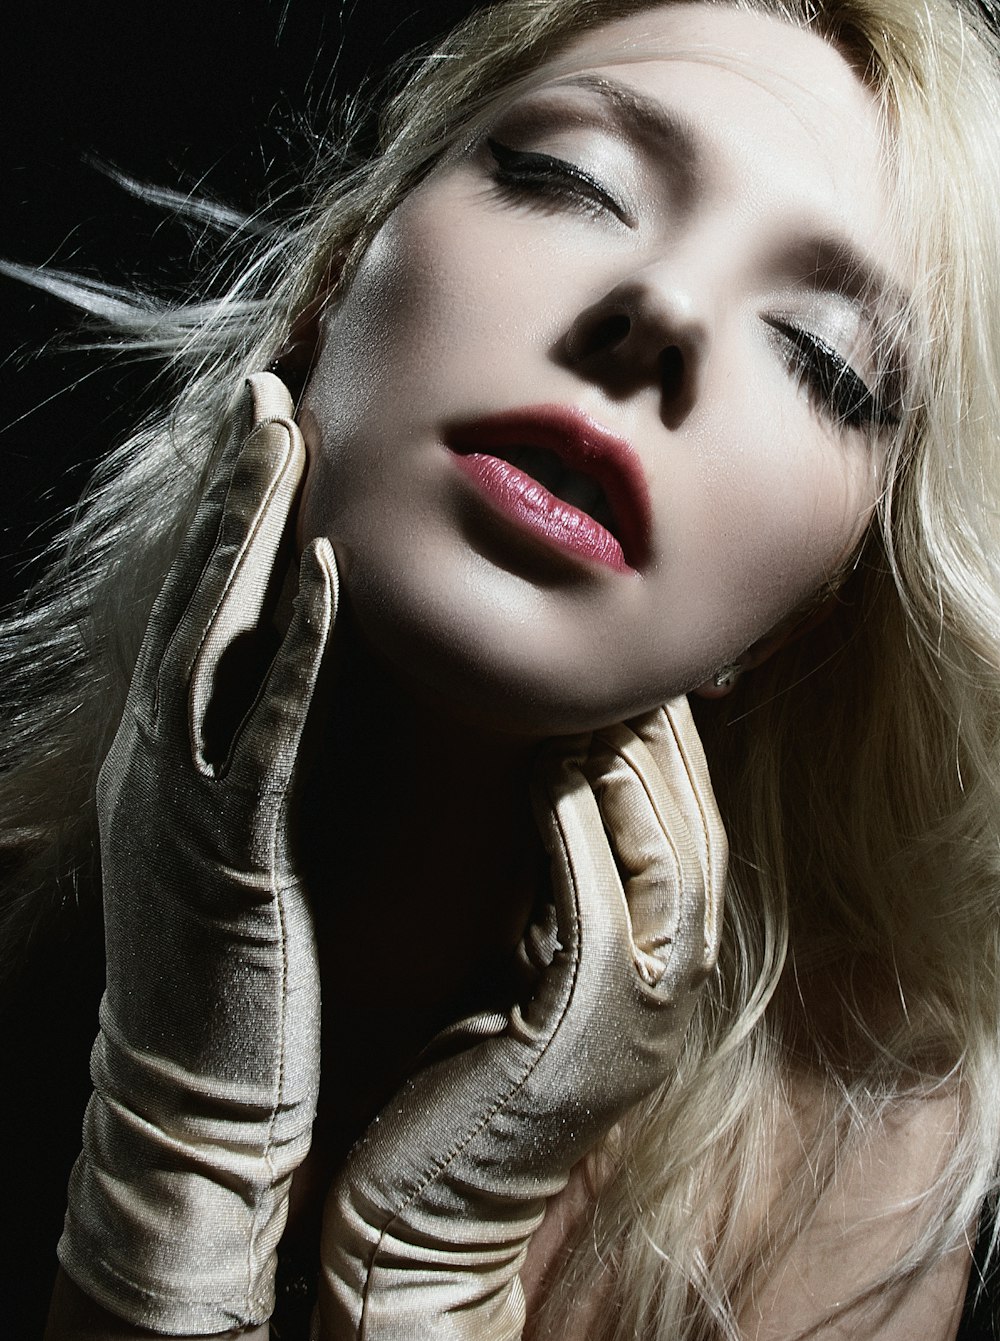 a woman with long blonde hair wearing gloves